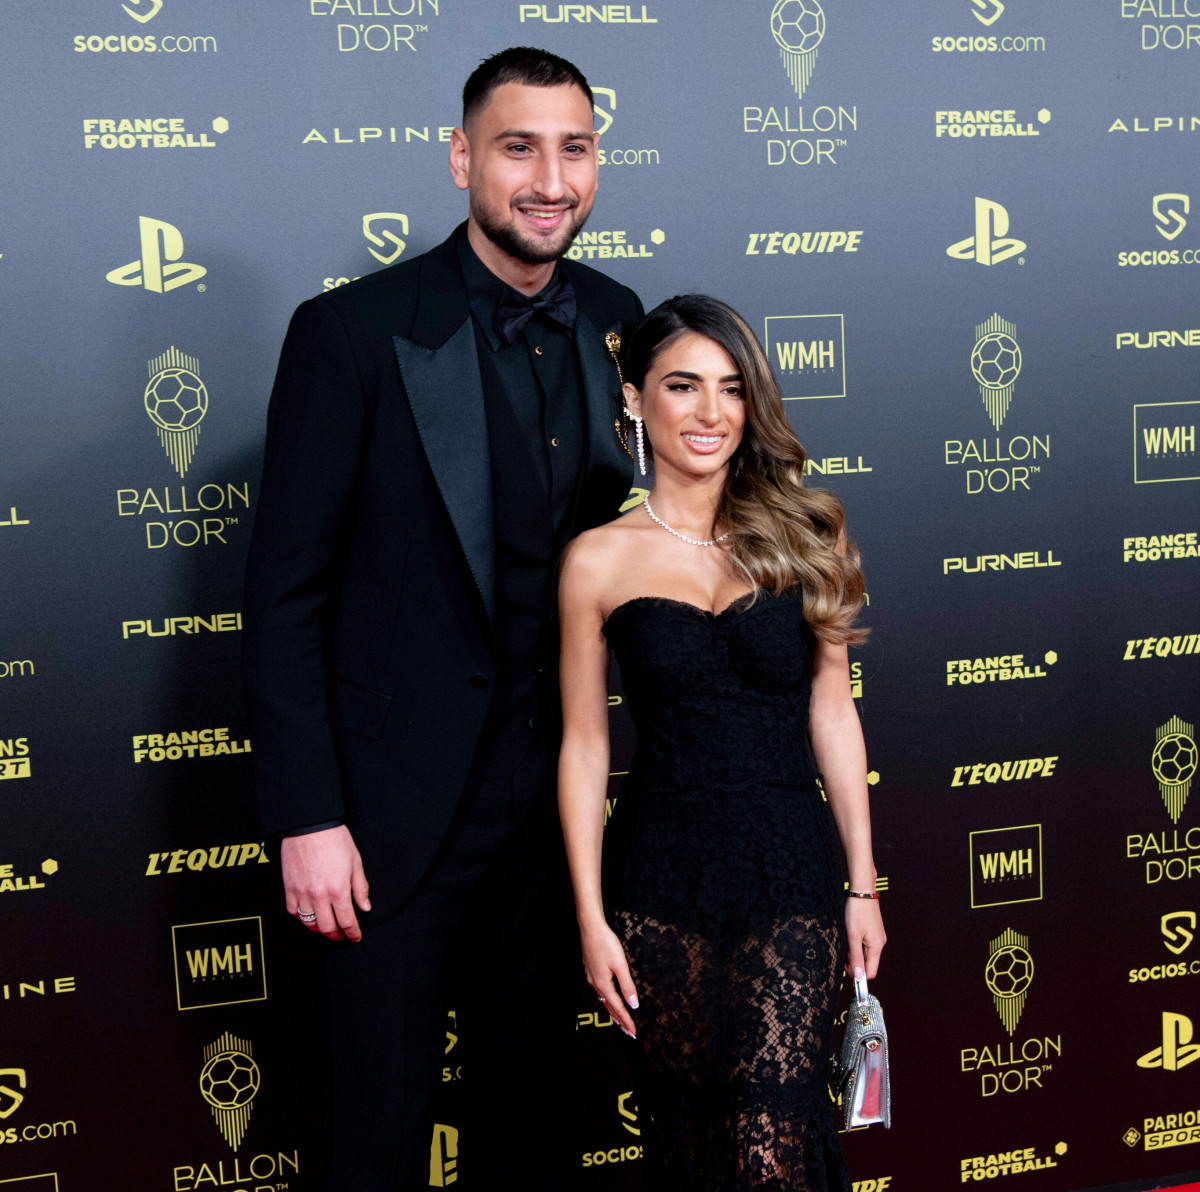 Gianluigi Donnarumma and girlfriend Alessia Elefante pictured in 2021 at the Ballon d'Or awards ceremony